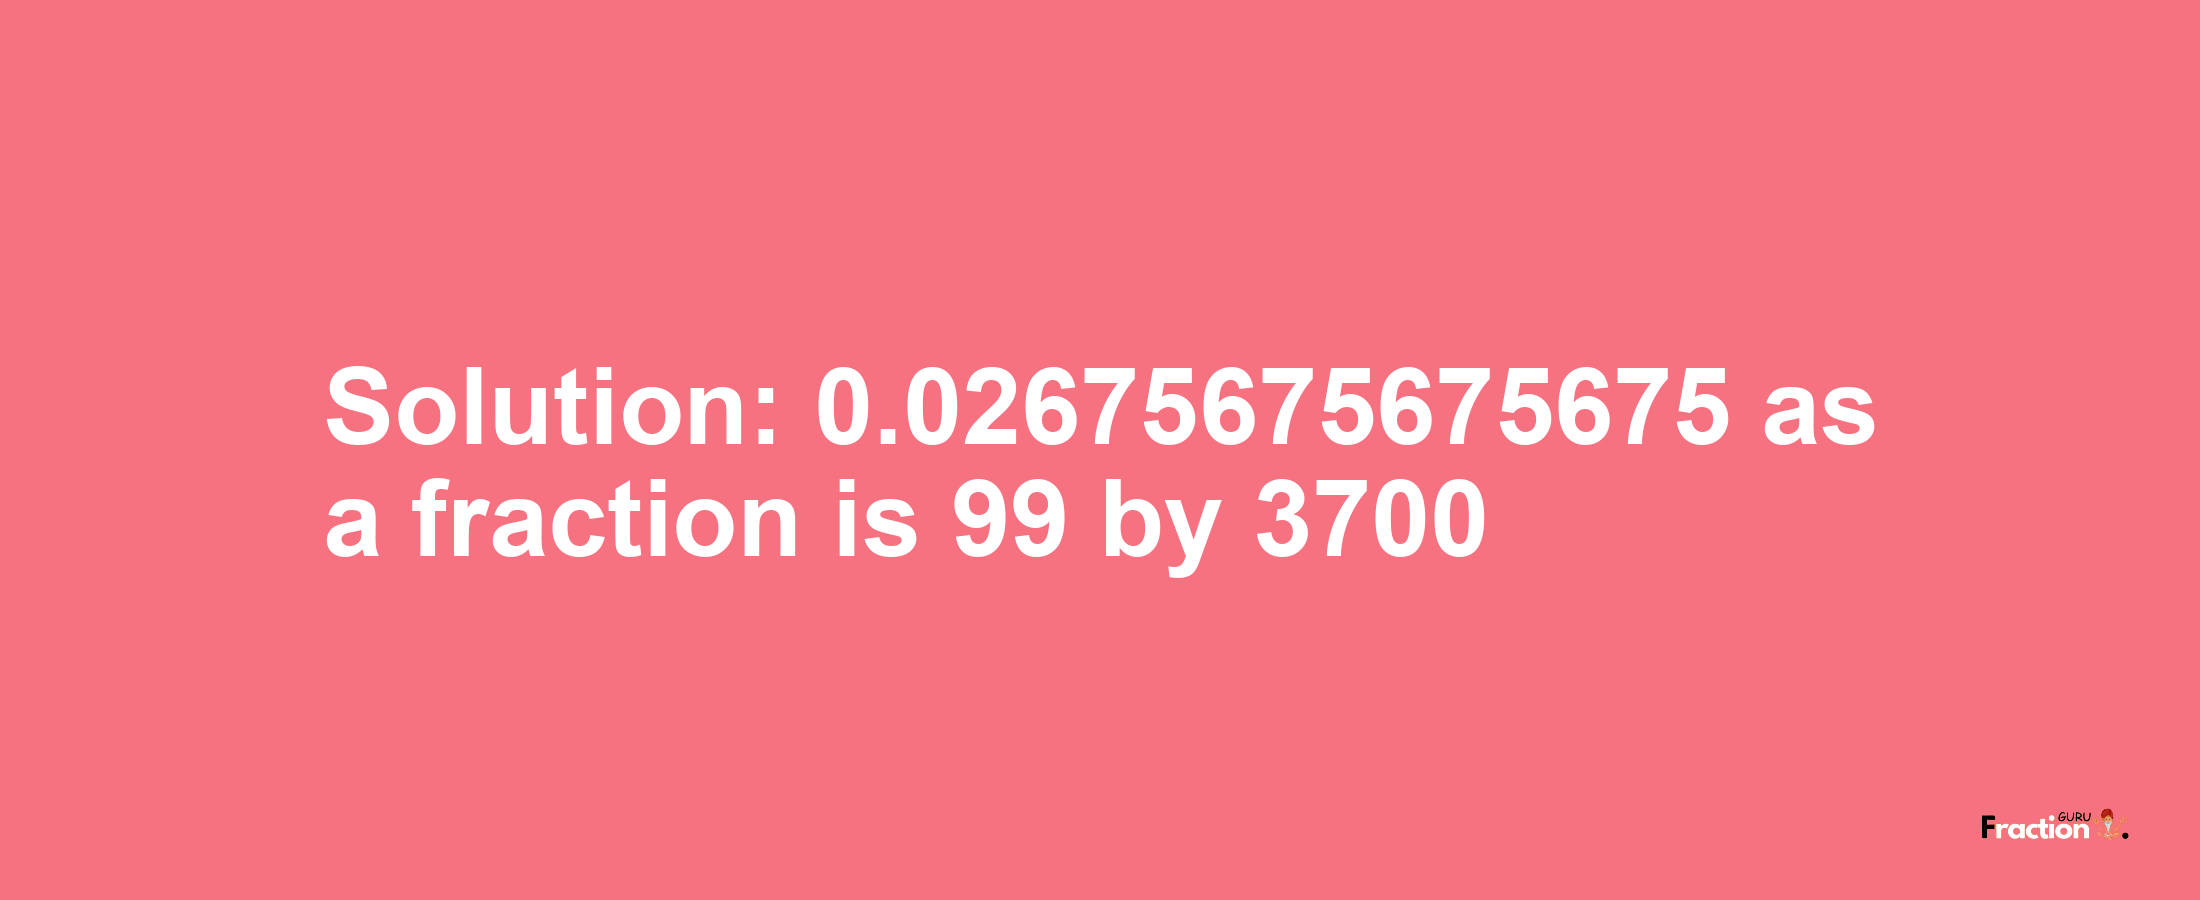 Solution:0.02675675675675 as a fraction is 99/3700